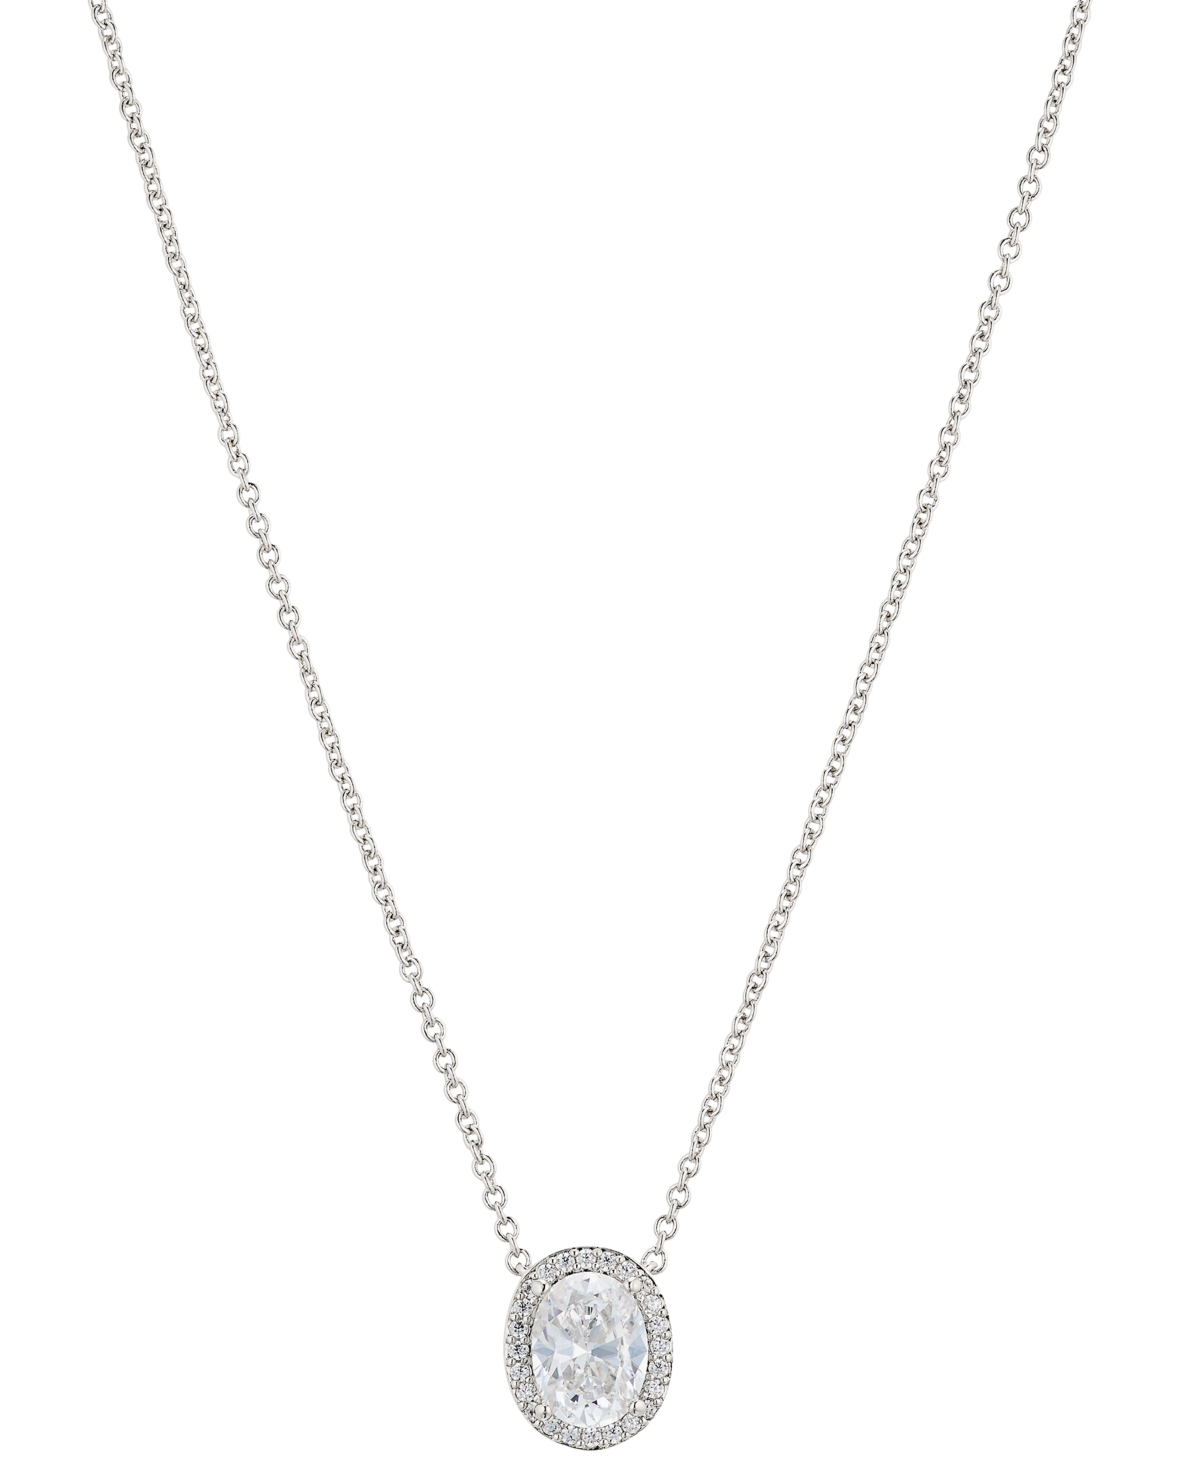 Crystal Oval Halo Necklace, 16" + 2" extender - Rhodium